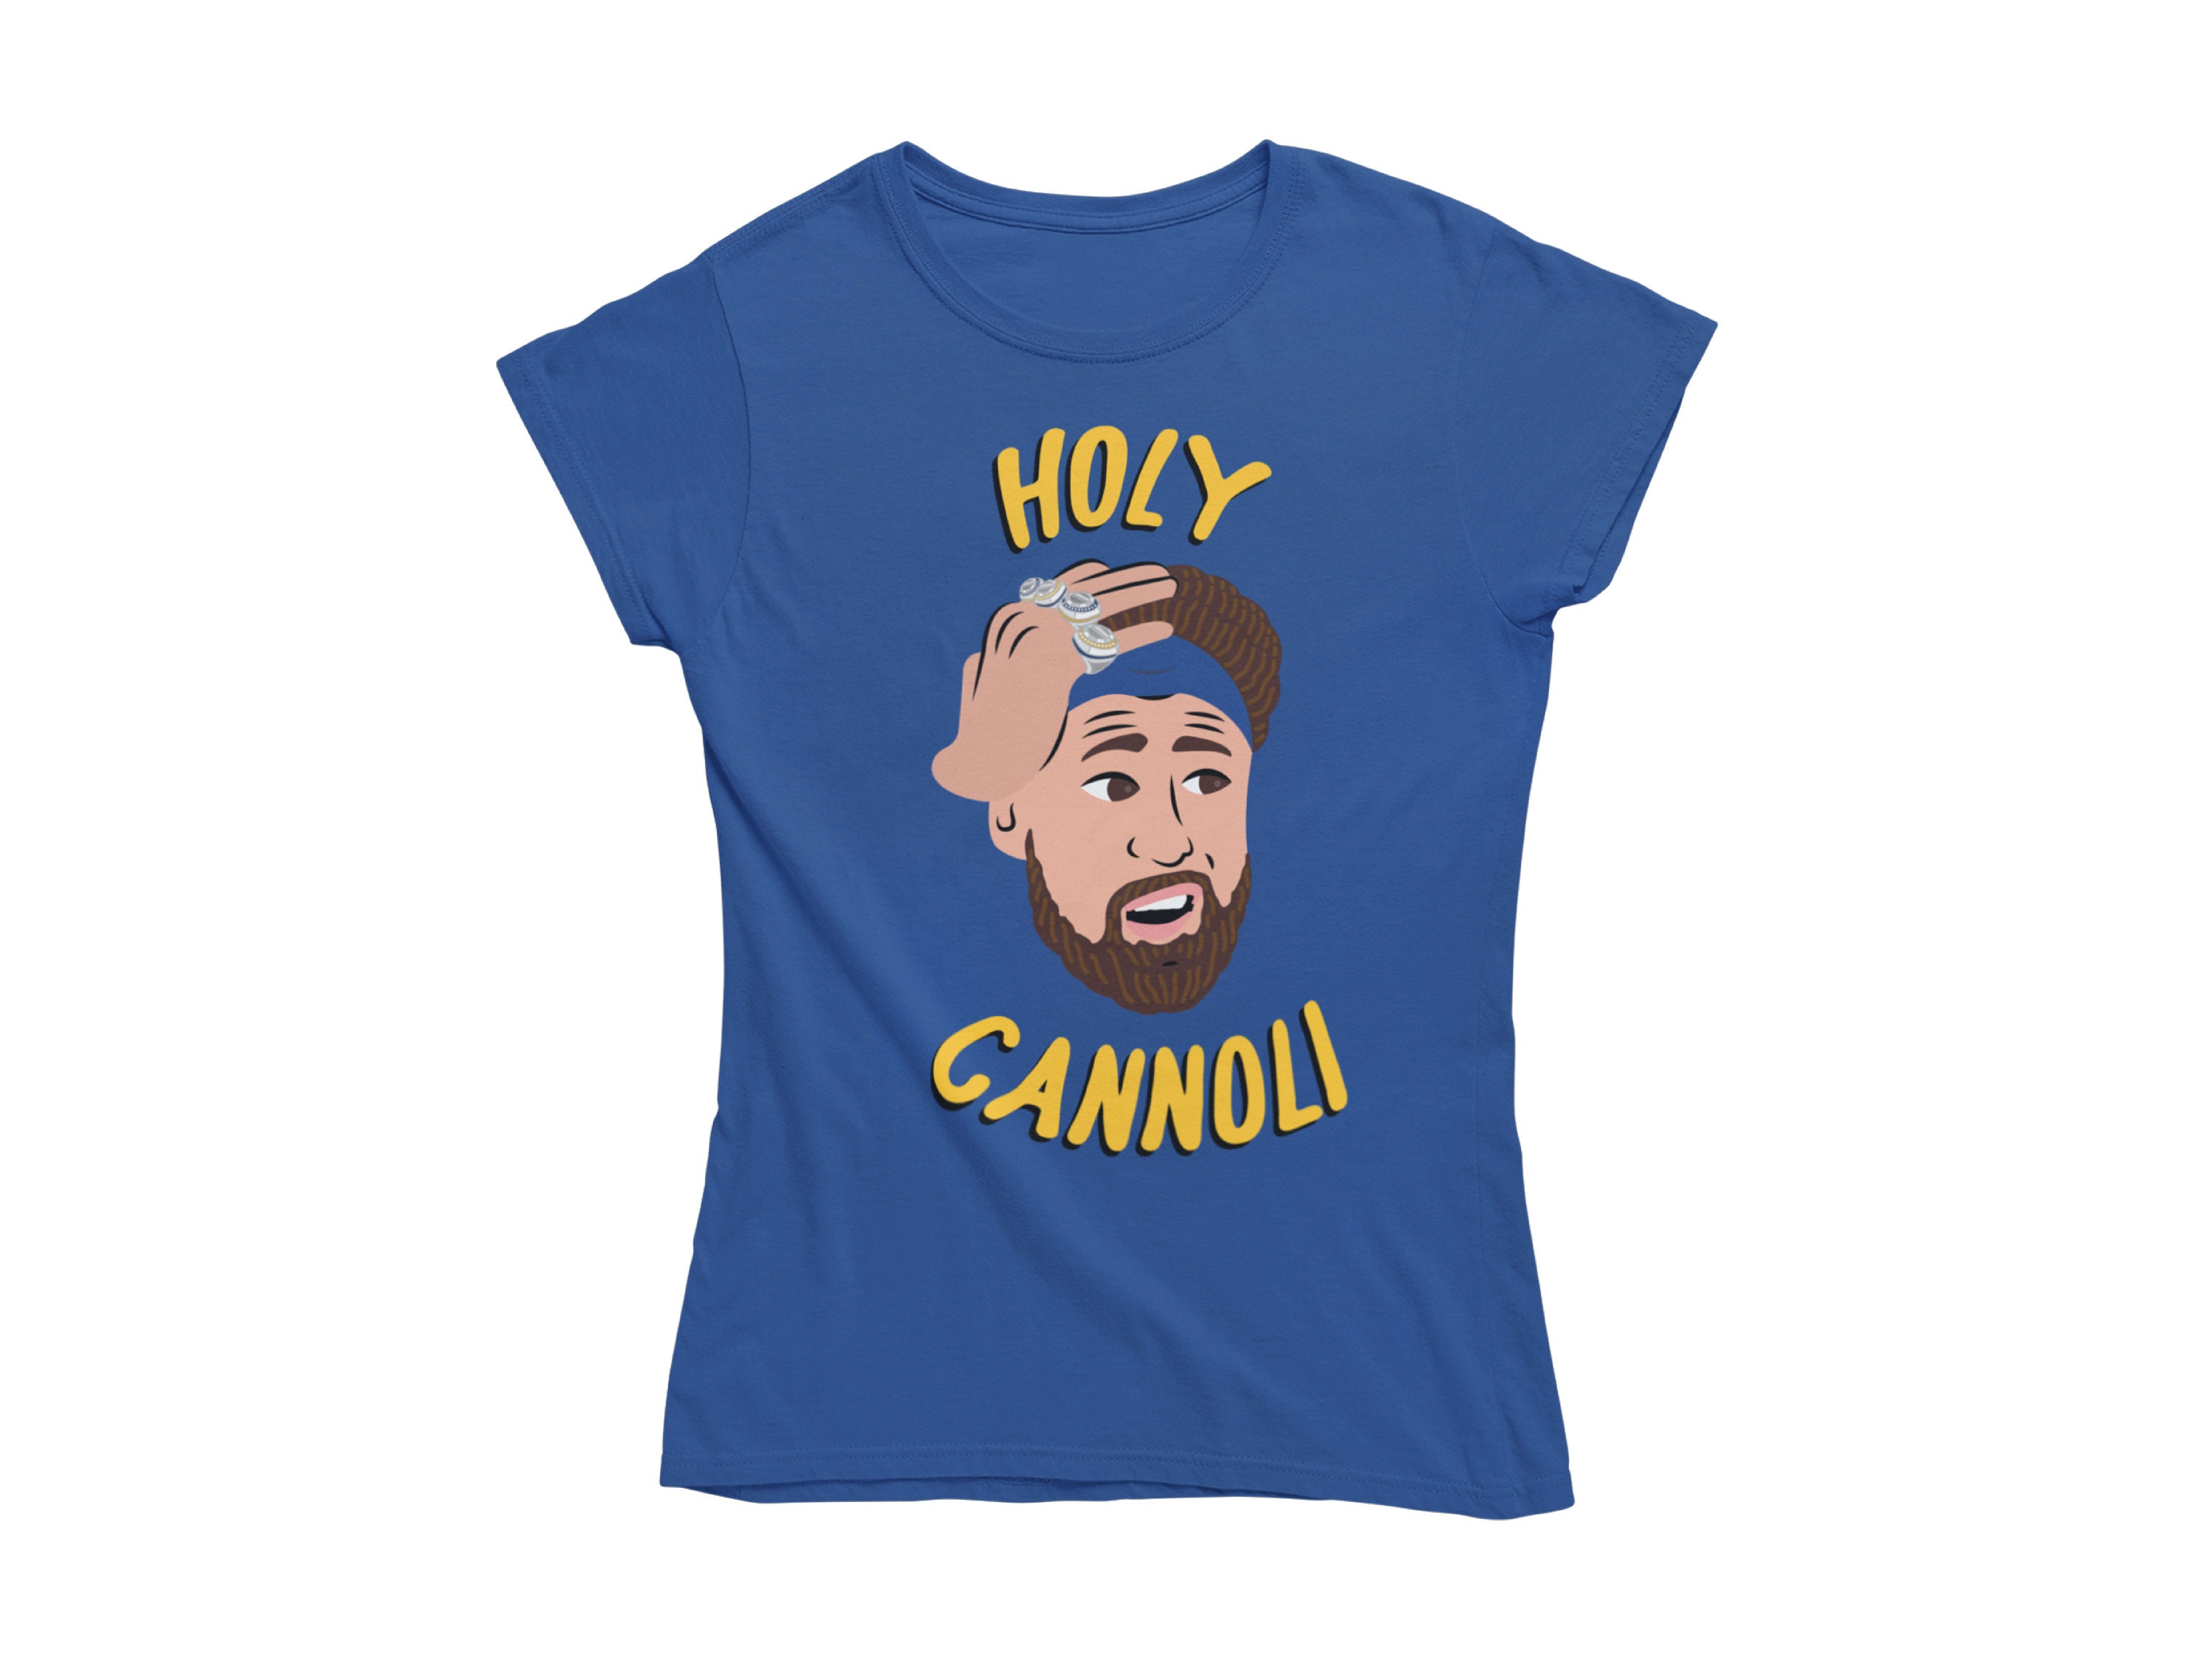 Klay Thompson Holy Cannoli Unisex Shirt For Fans - Trends Bedding